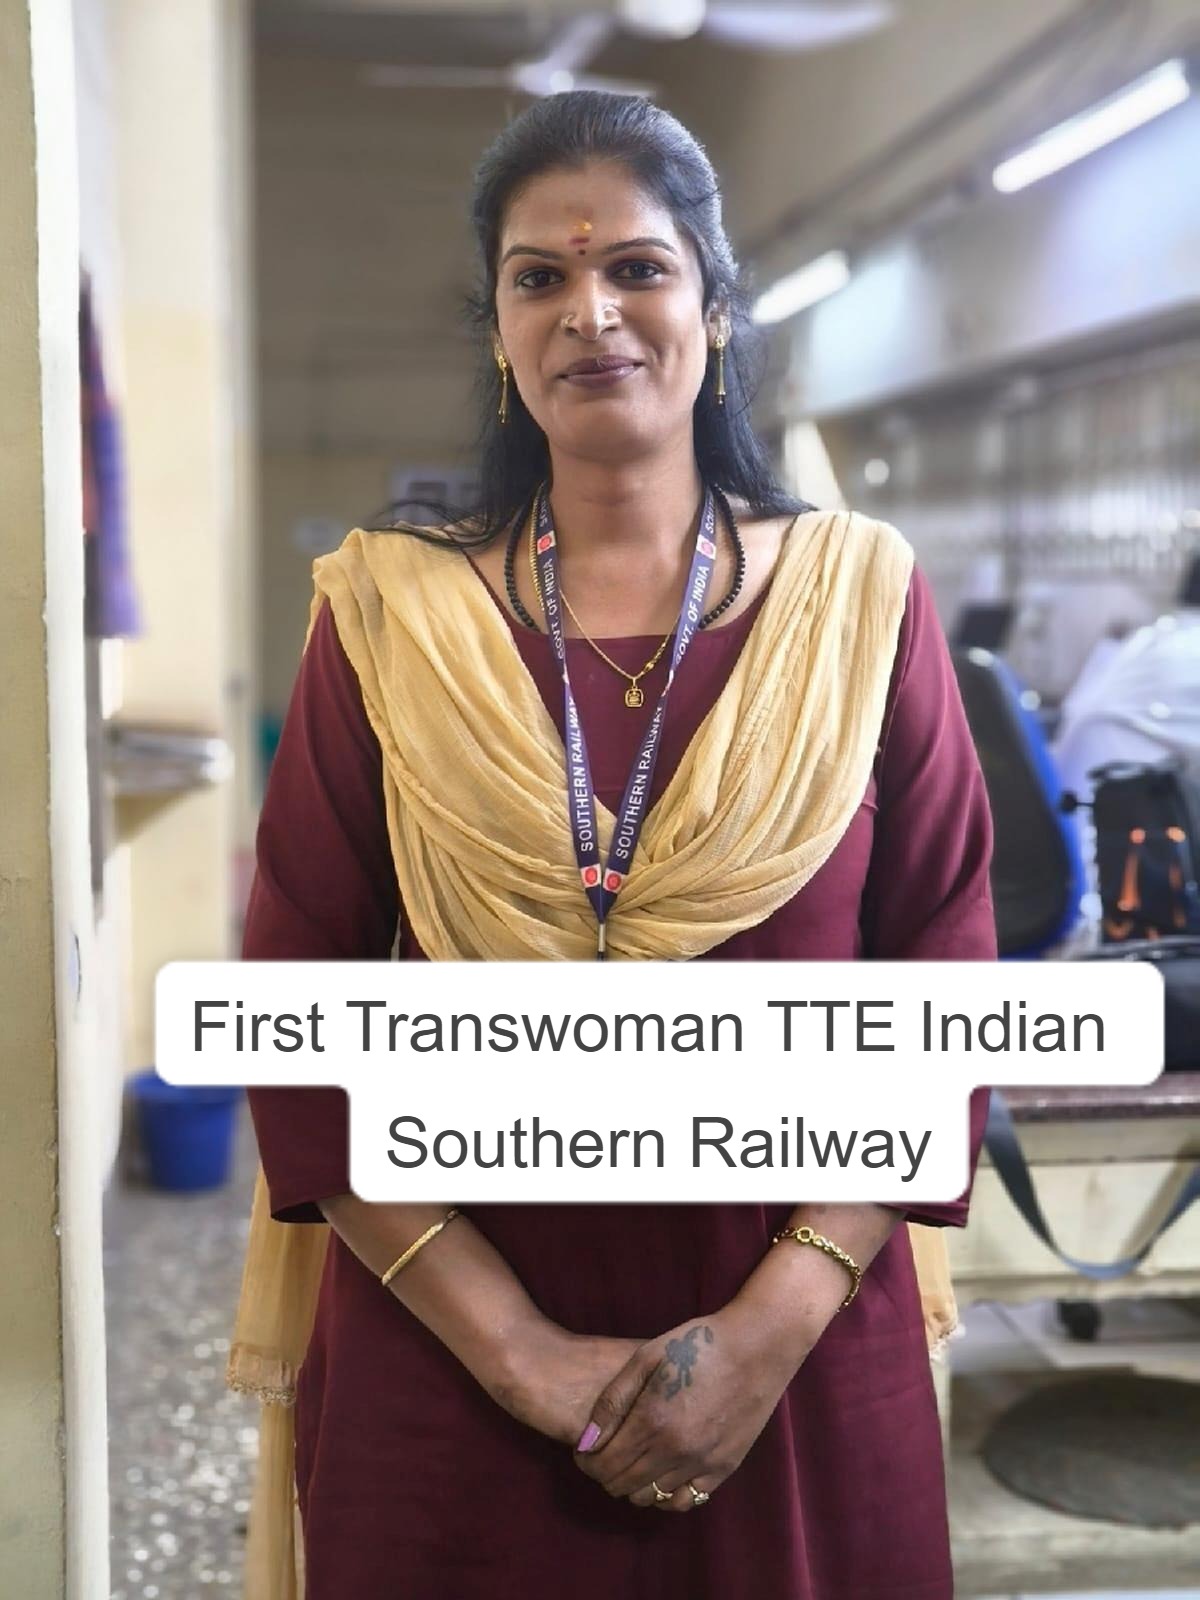 Congrats To India, to give 1st opportunity for Transwomen became TTE